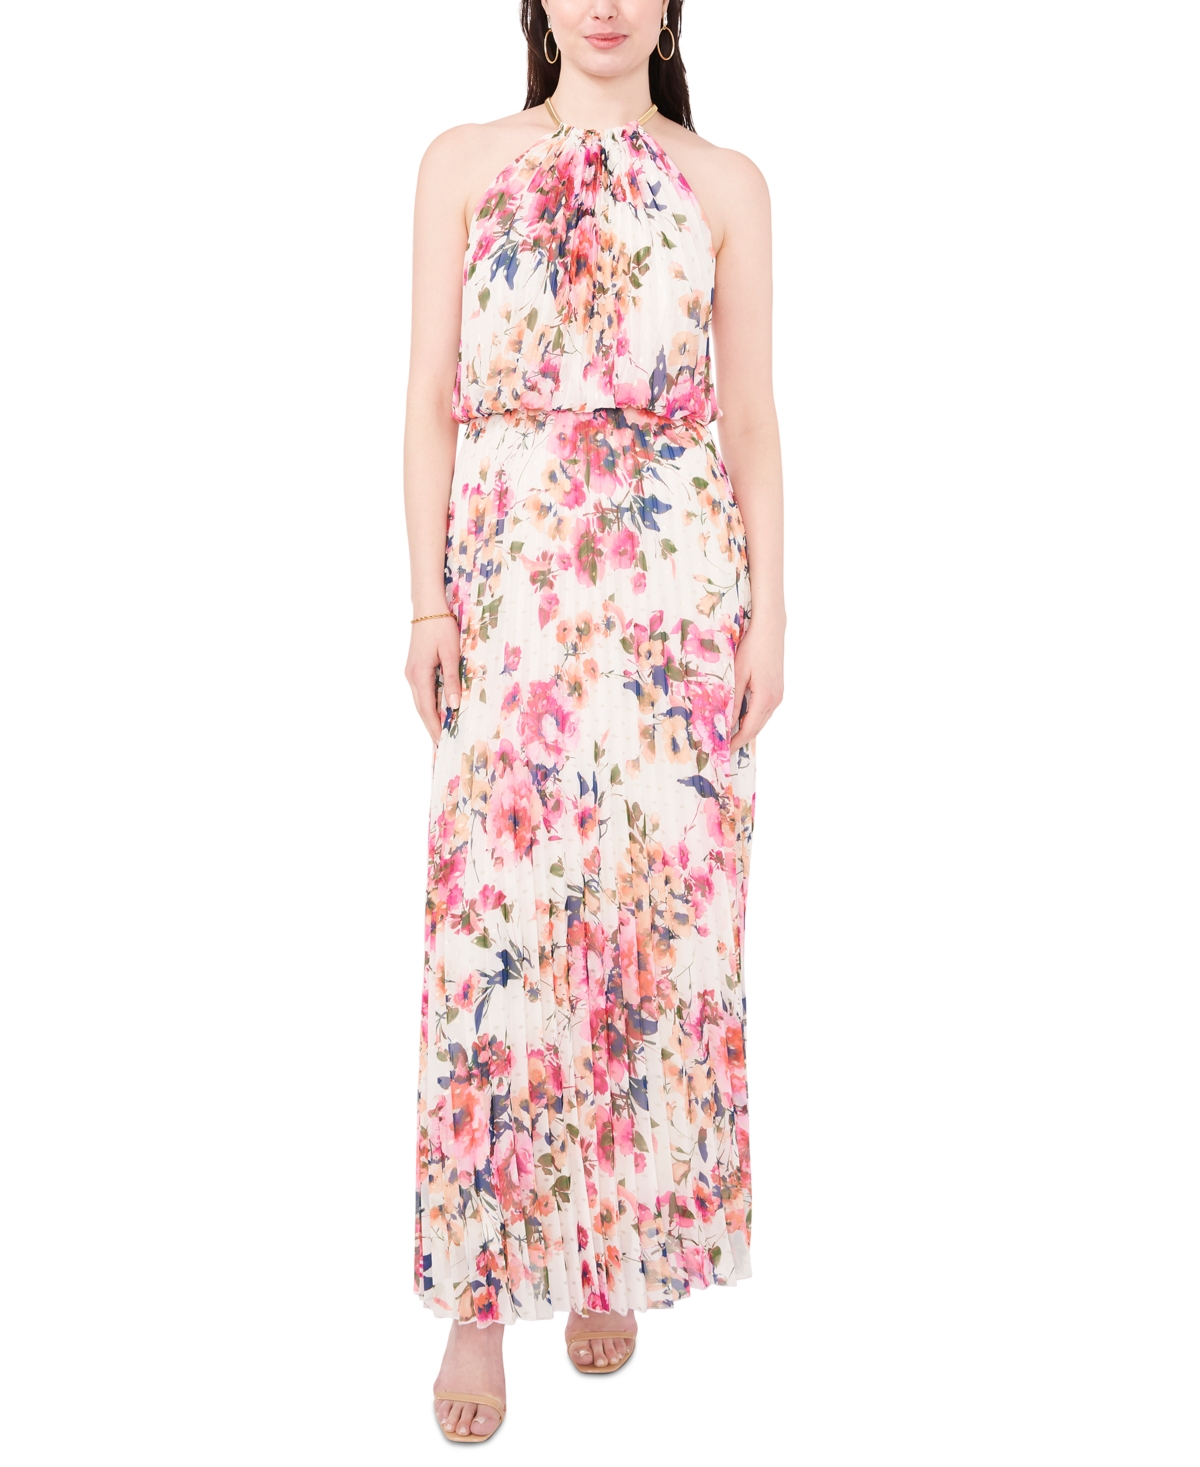 Floral Print Pleated Dress - White/Pink/Peach